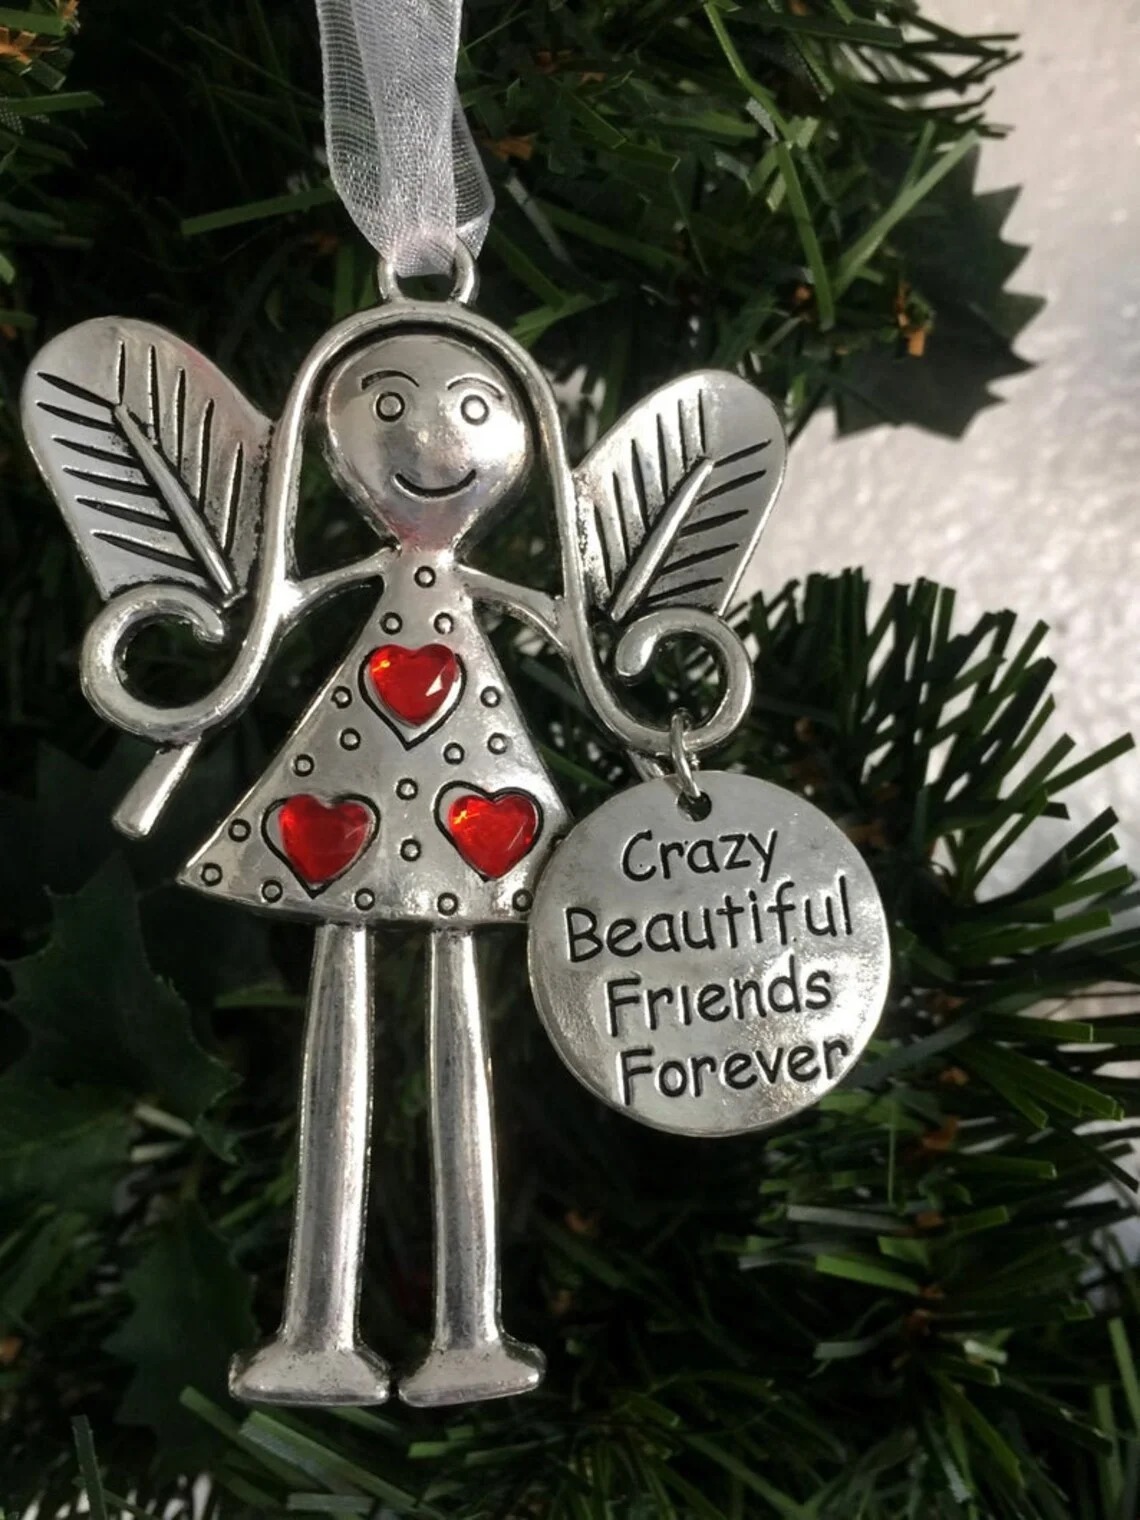 👼Crazy Beautiful Friends Forever - Angel Ornament Christmas Gift